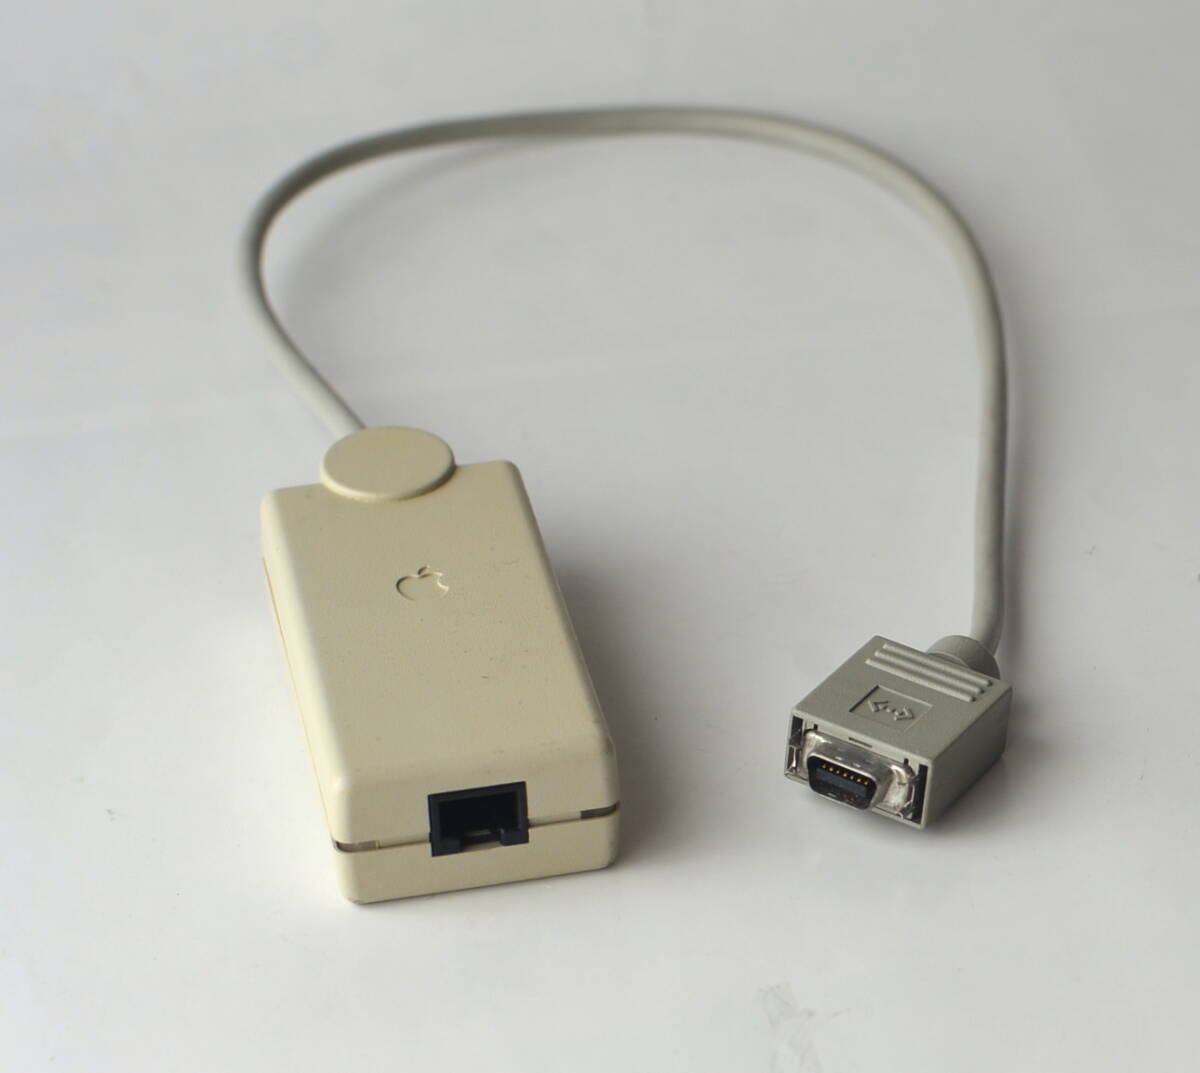 Apple Ethernet Twisted Pair Transceiver M0437 MADE IN USA